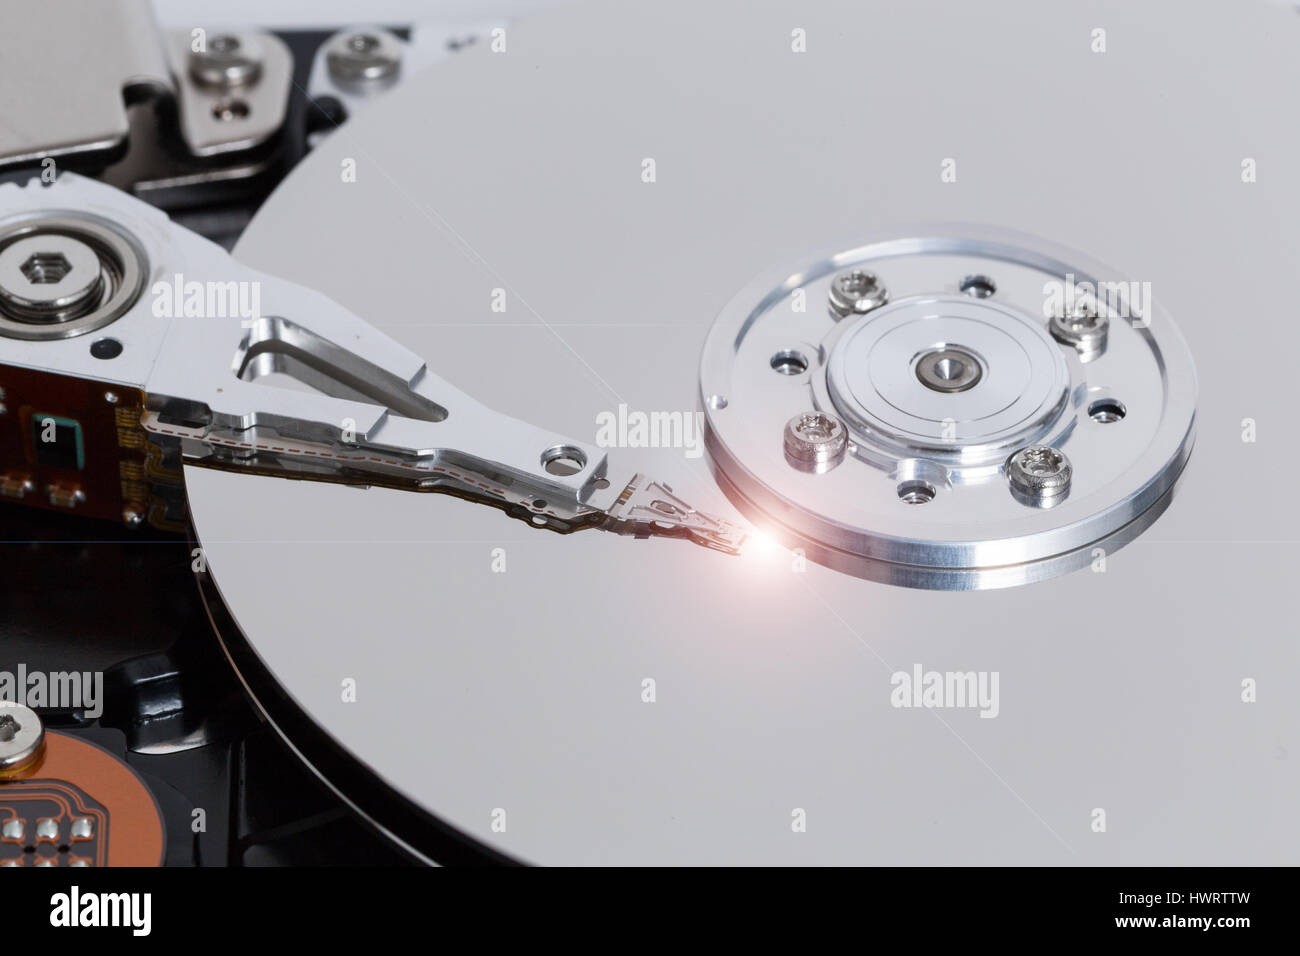 Open hard drive with magnetic disk and writing head. Stock Photo